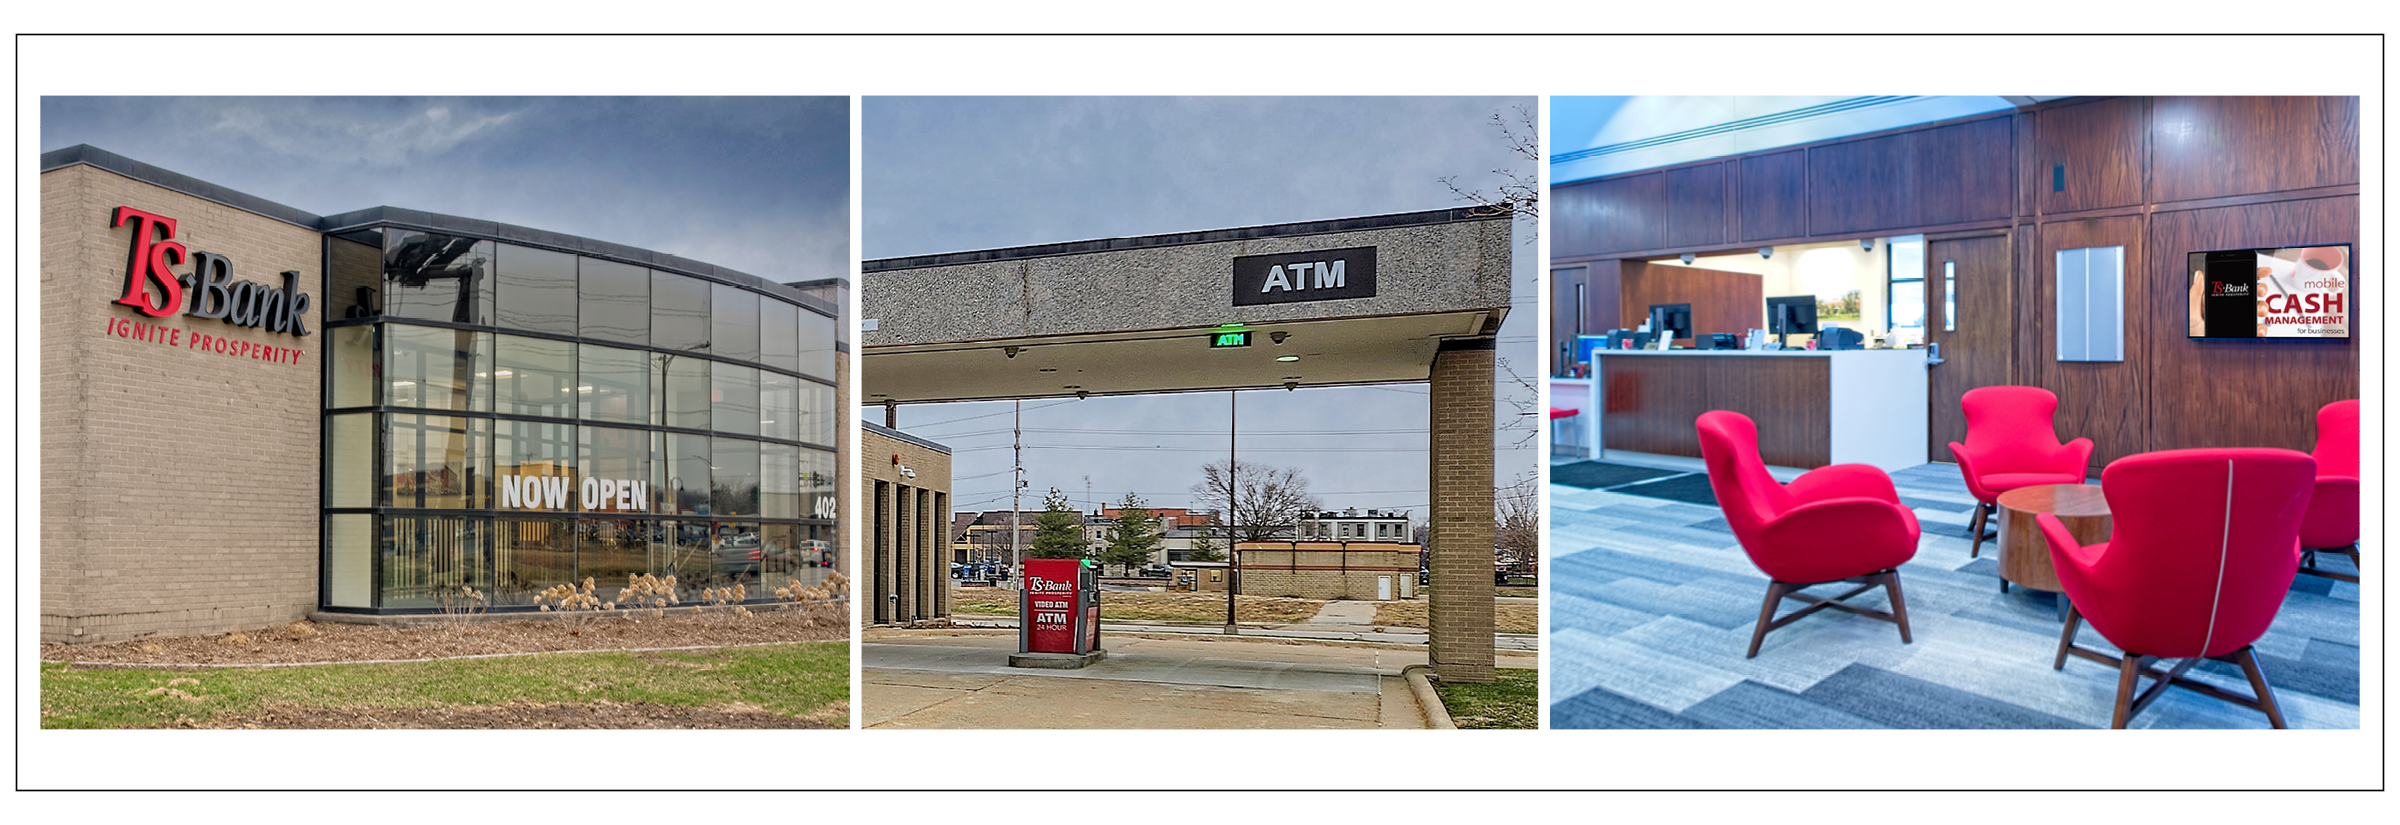 exterior and interior images of the ts bank ames location